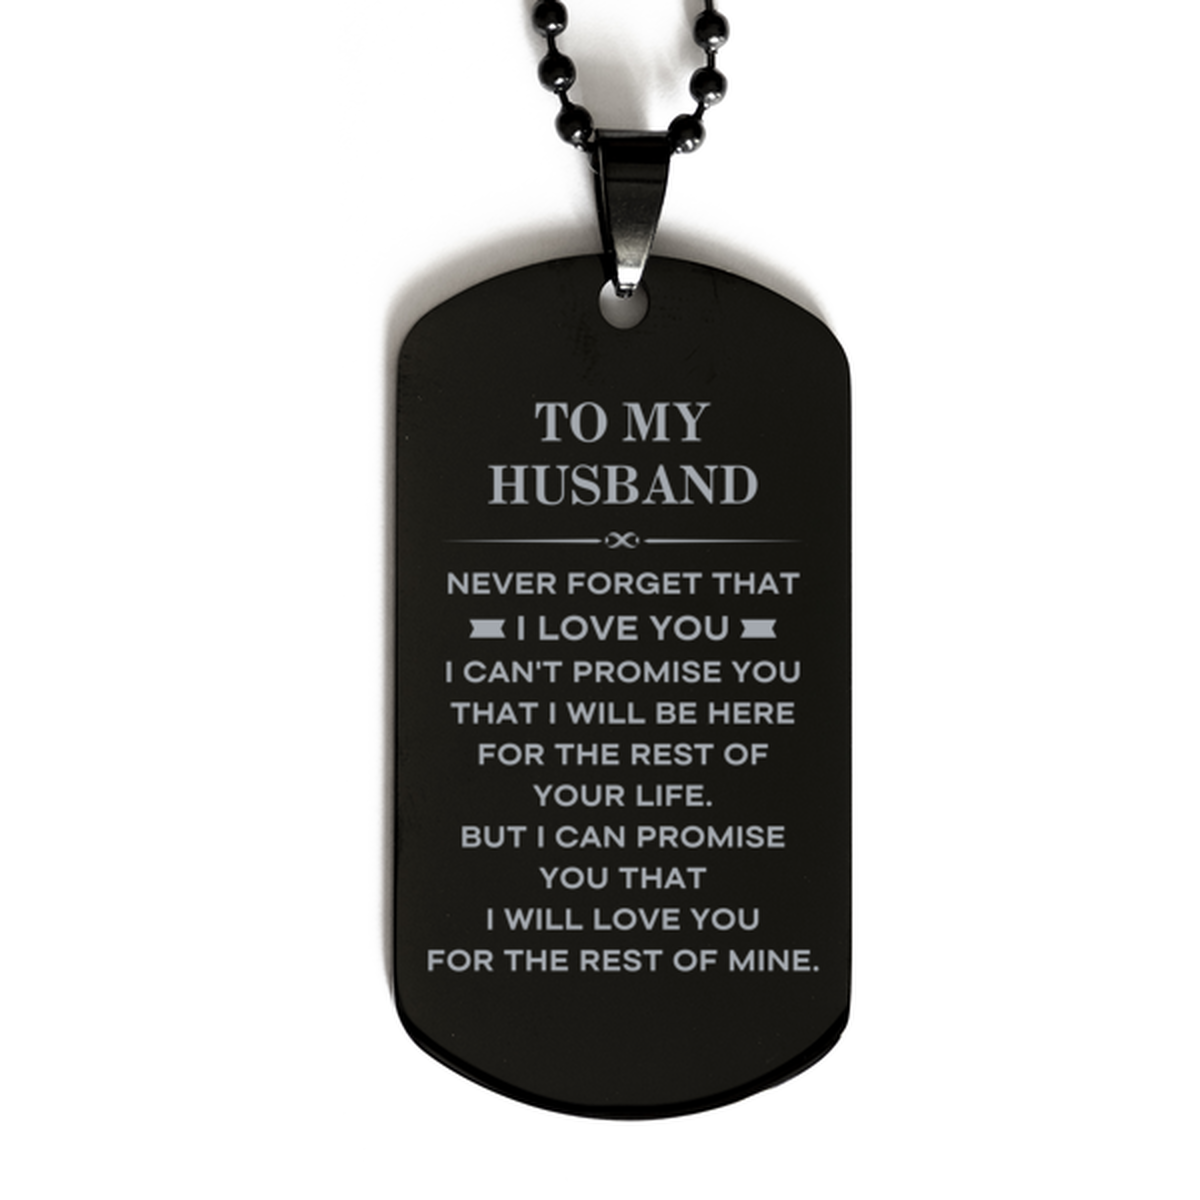 To My Husband Gifts, I will love you for the rest of mine, Love Husband Dog Tag Necklace, Birthday Christmas Unique Black Dog Tag For Husband